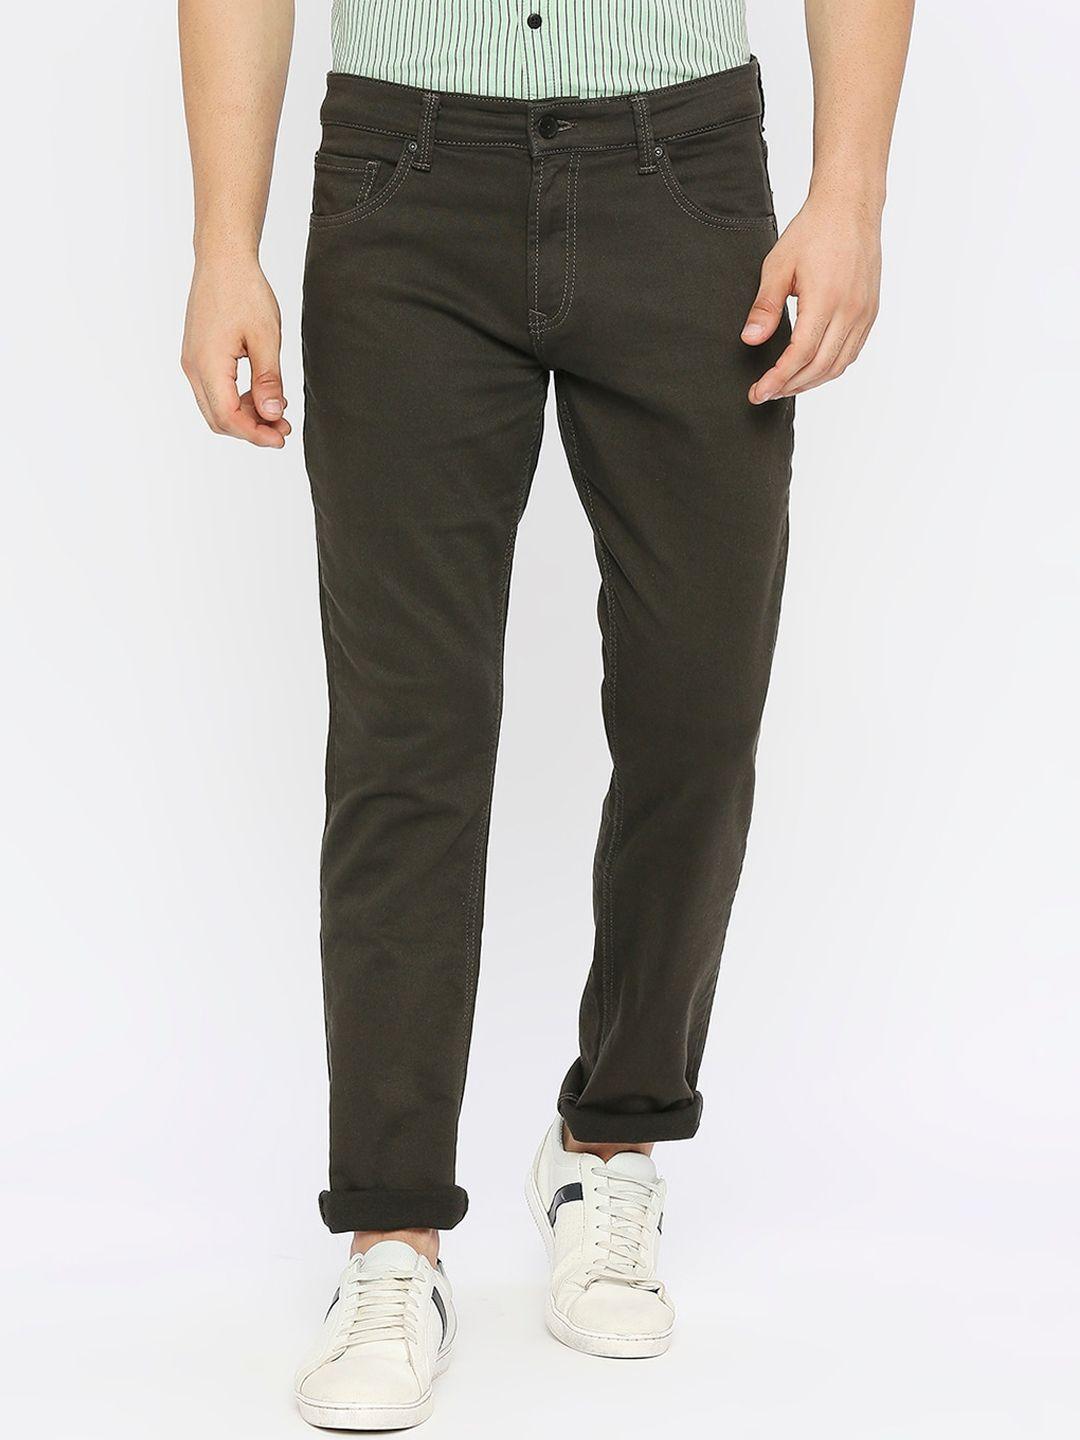 spykar-men-mid-rise-relaxed-fit-stretchable-jeans